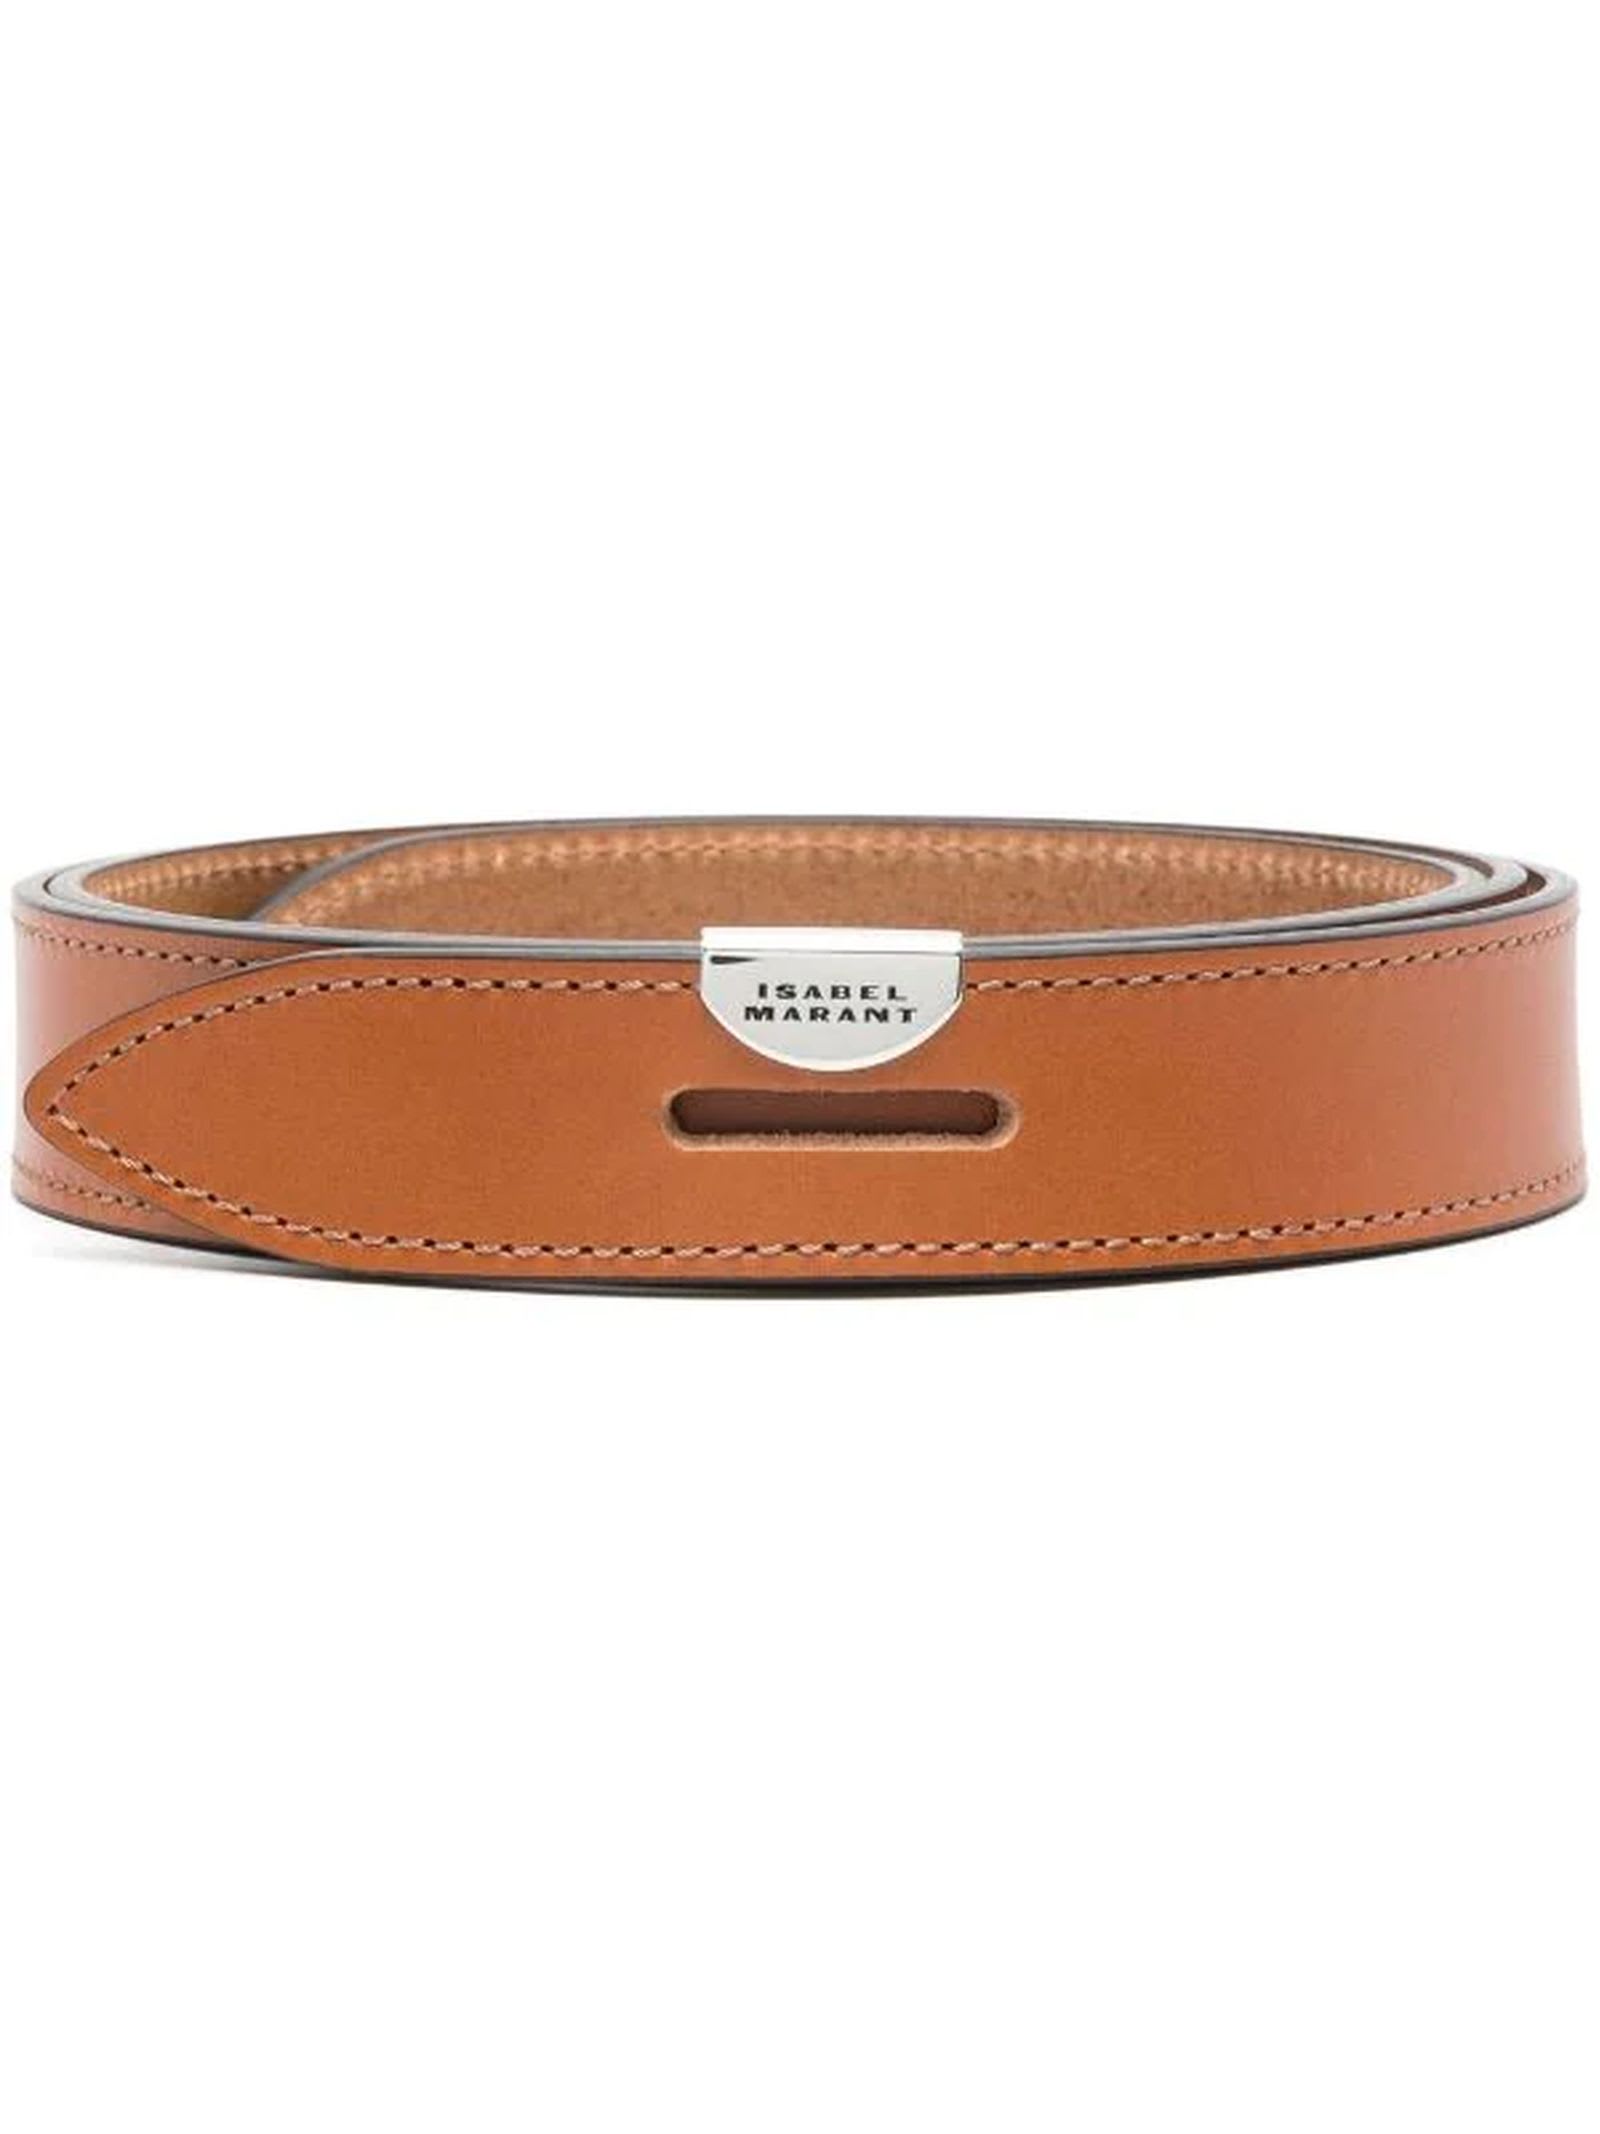 Isabel Marant Brown Calf Leather Belt In Cuoio | ModeSens